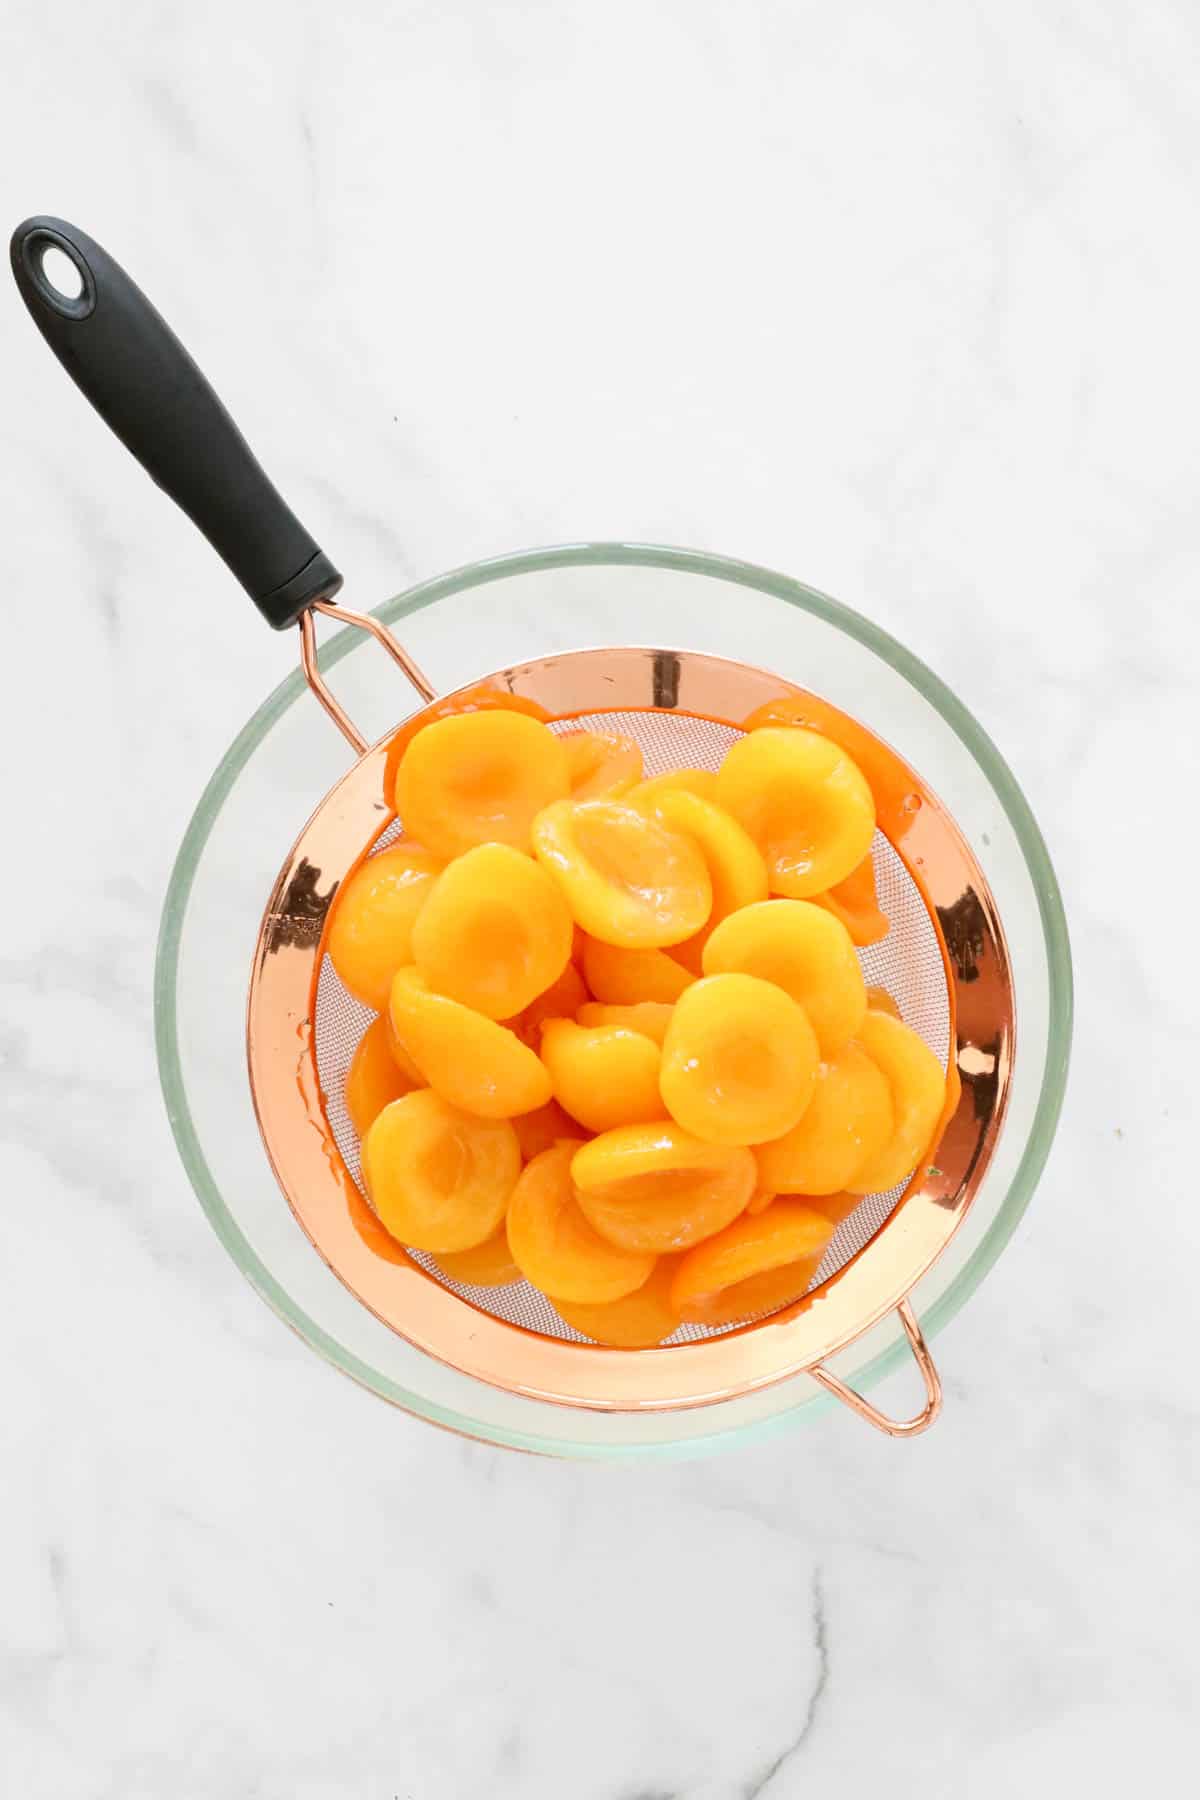 Tinned apricots in a sieve over a bowl.